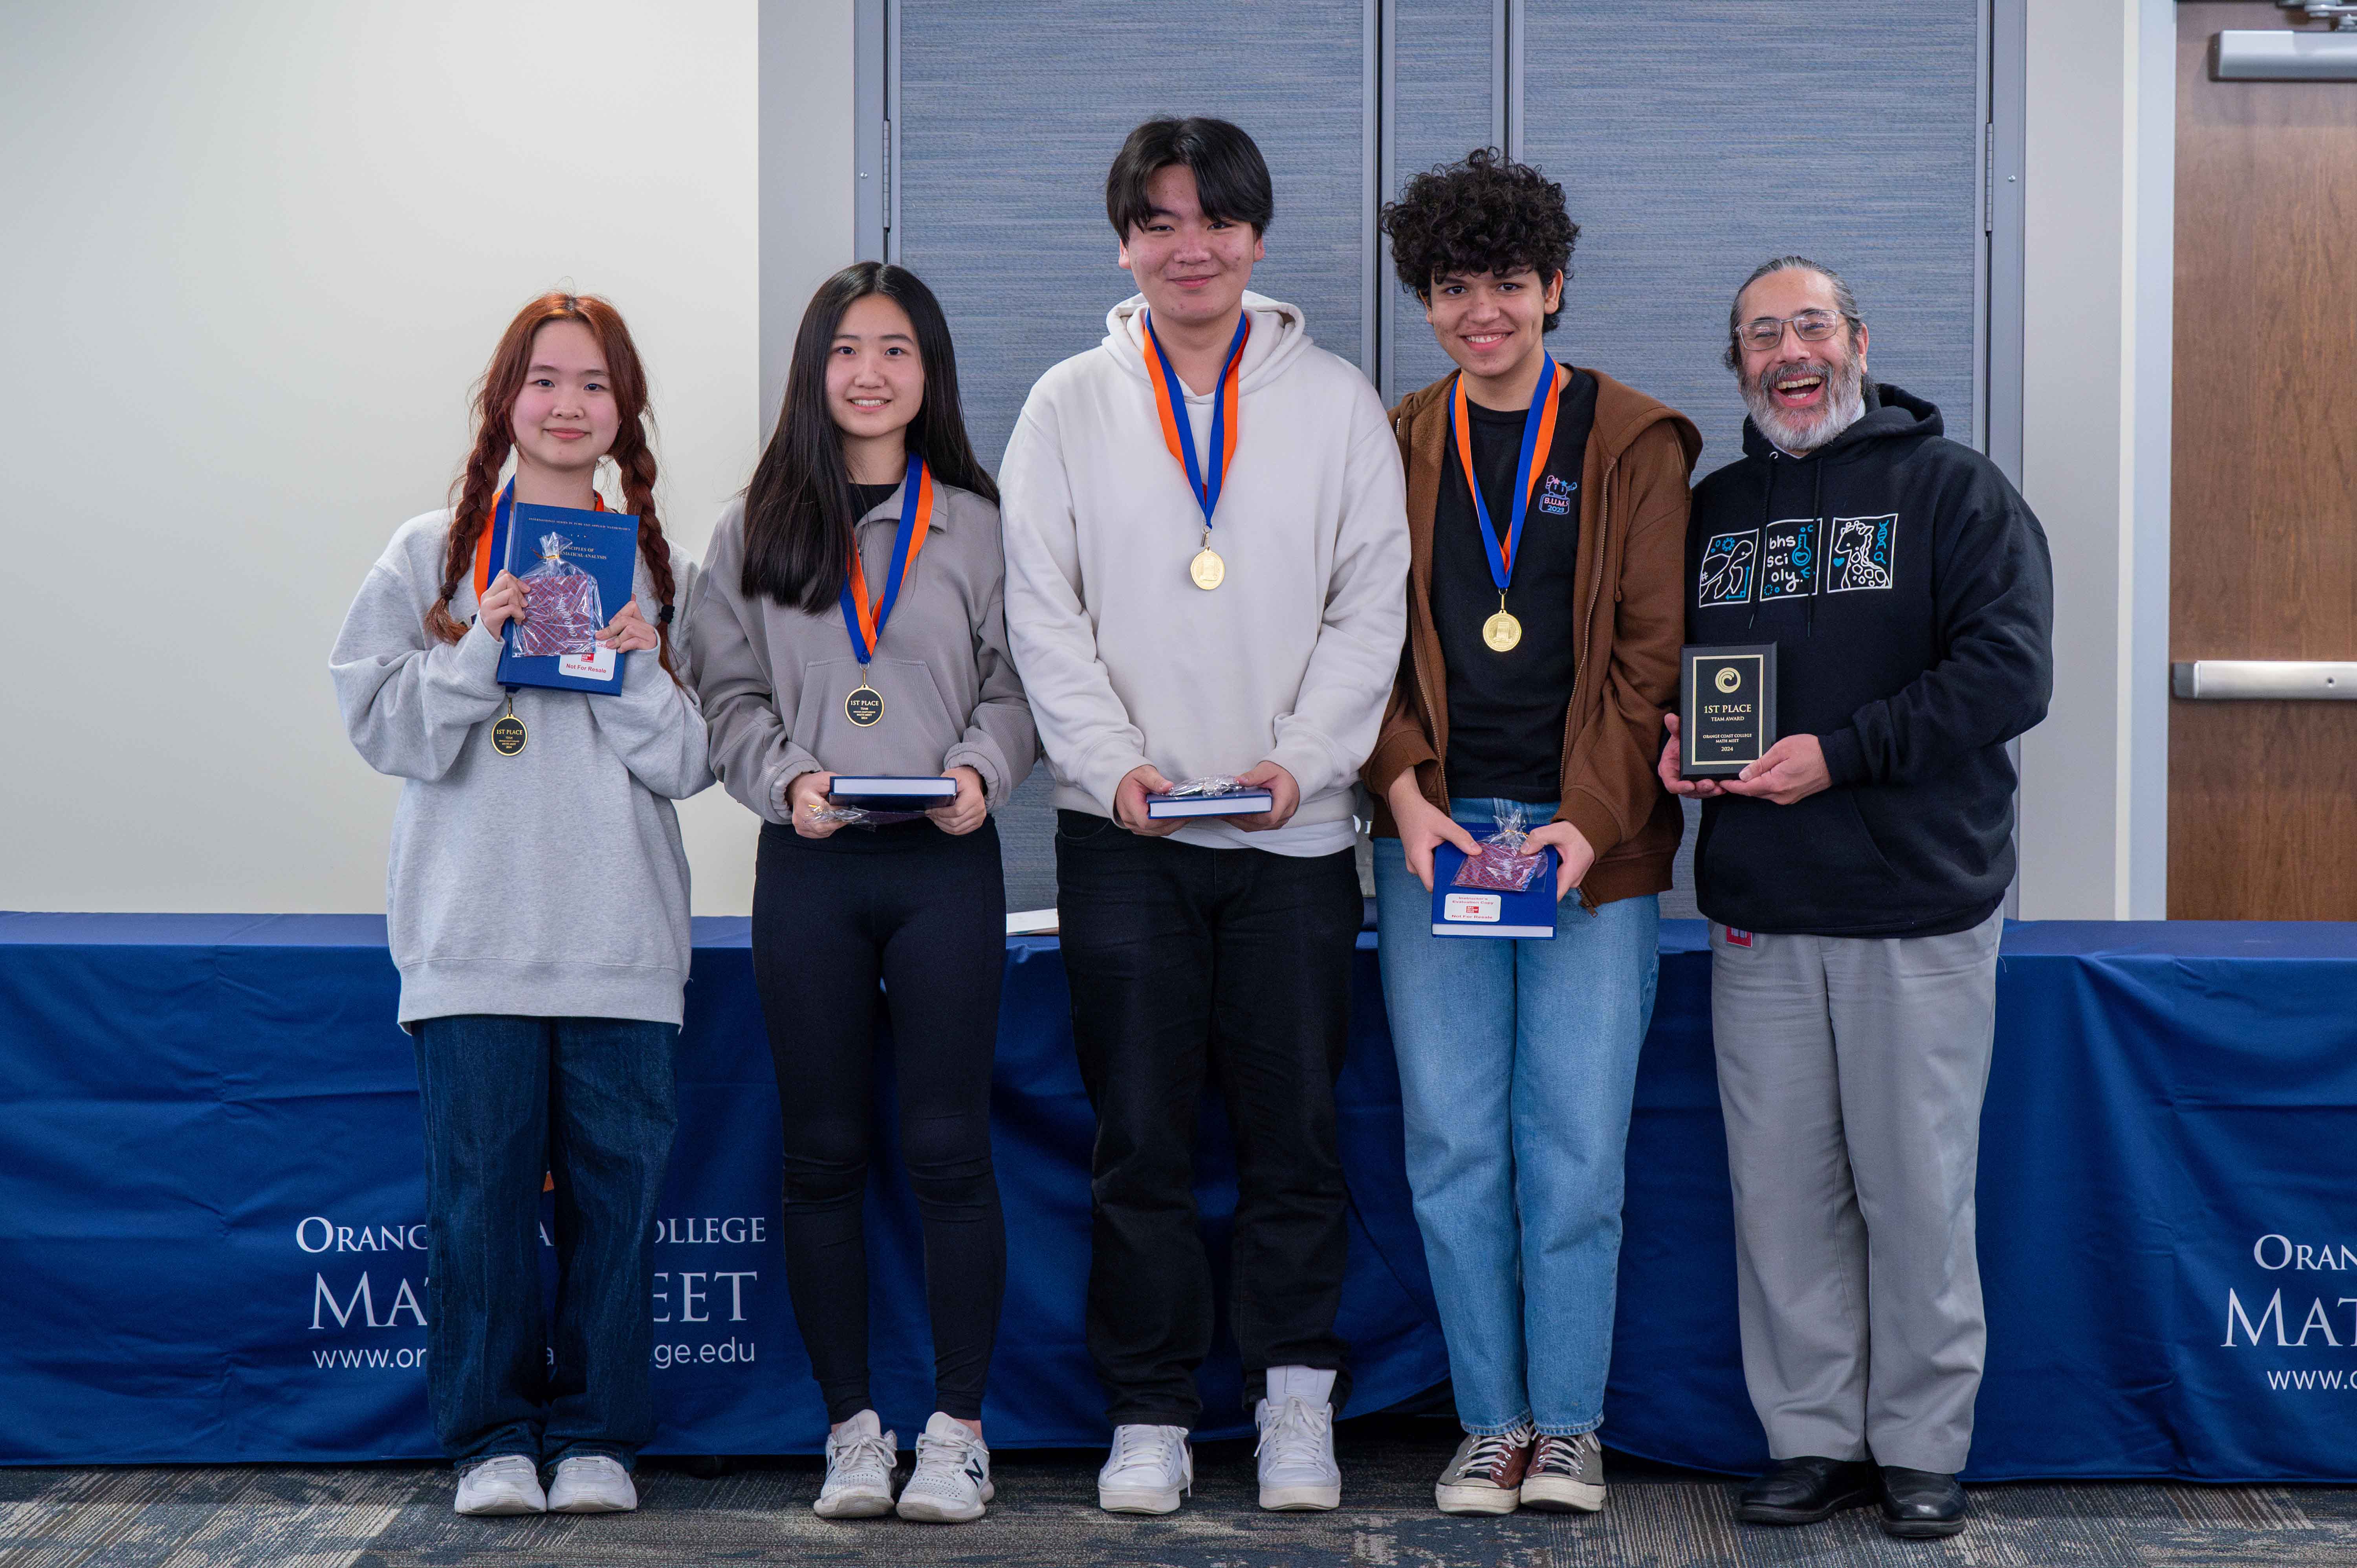 Beckman High School students receive their plaque and medals for winning the OCC Math Meet